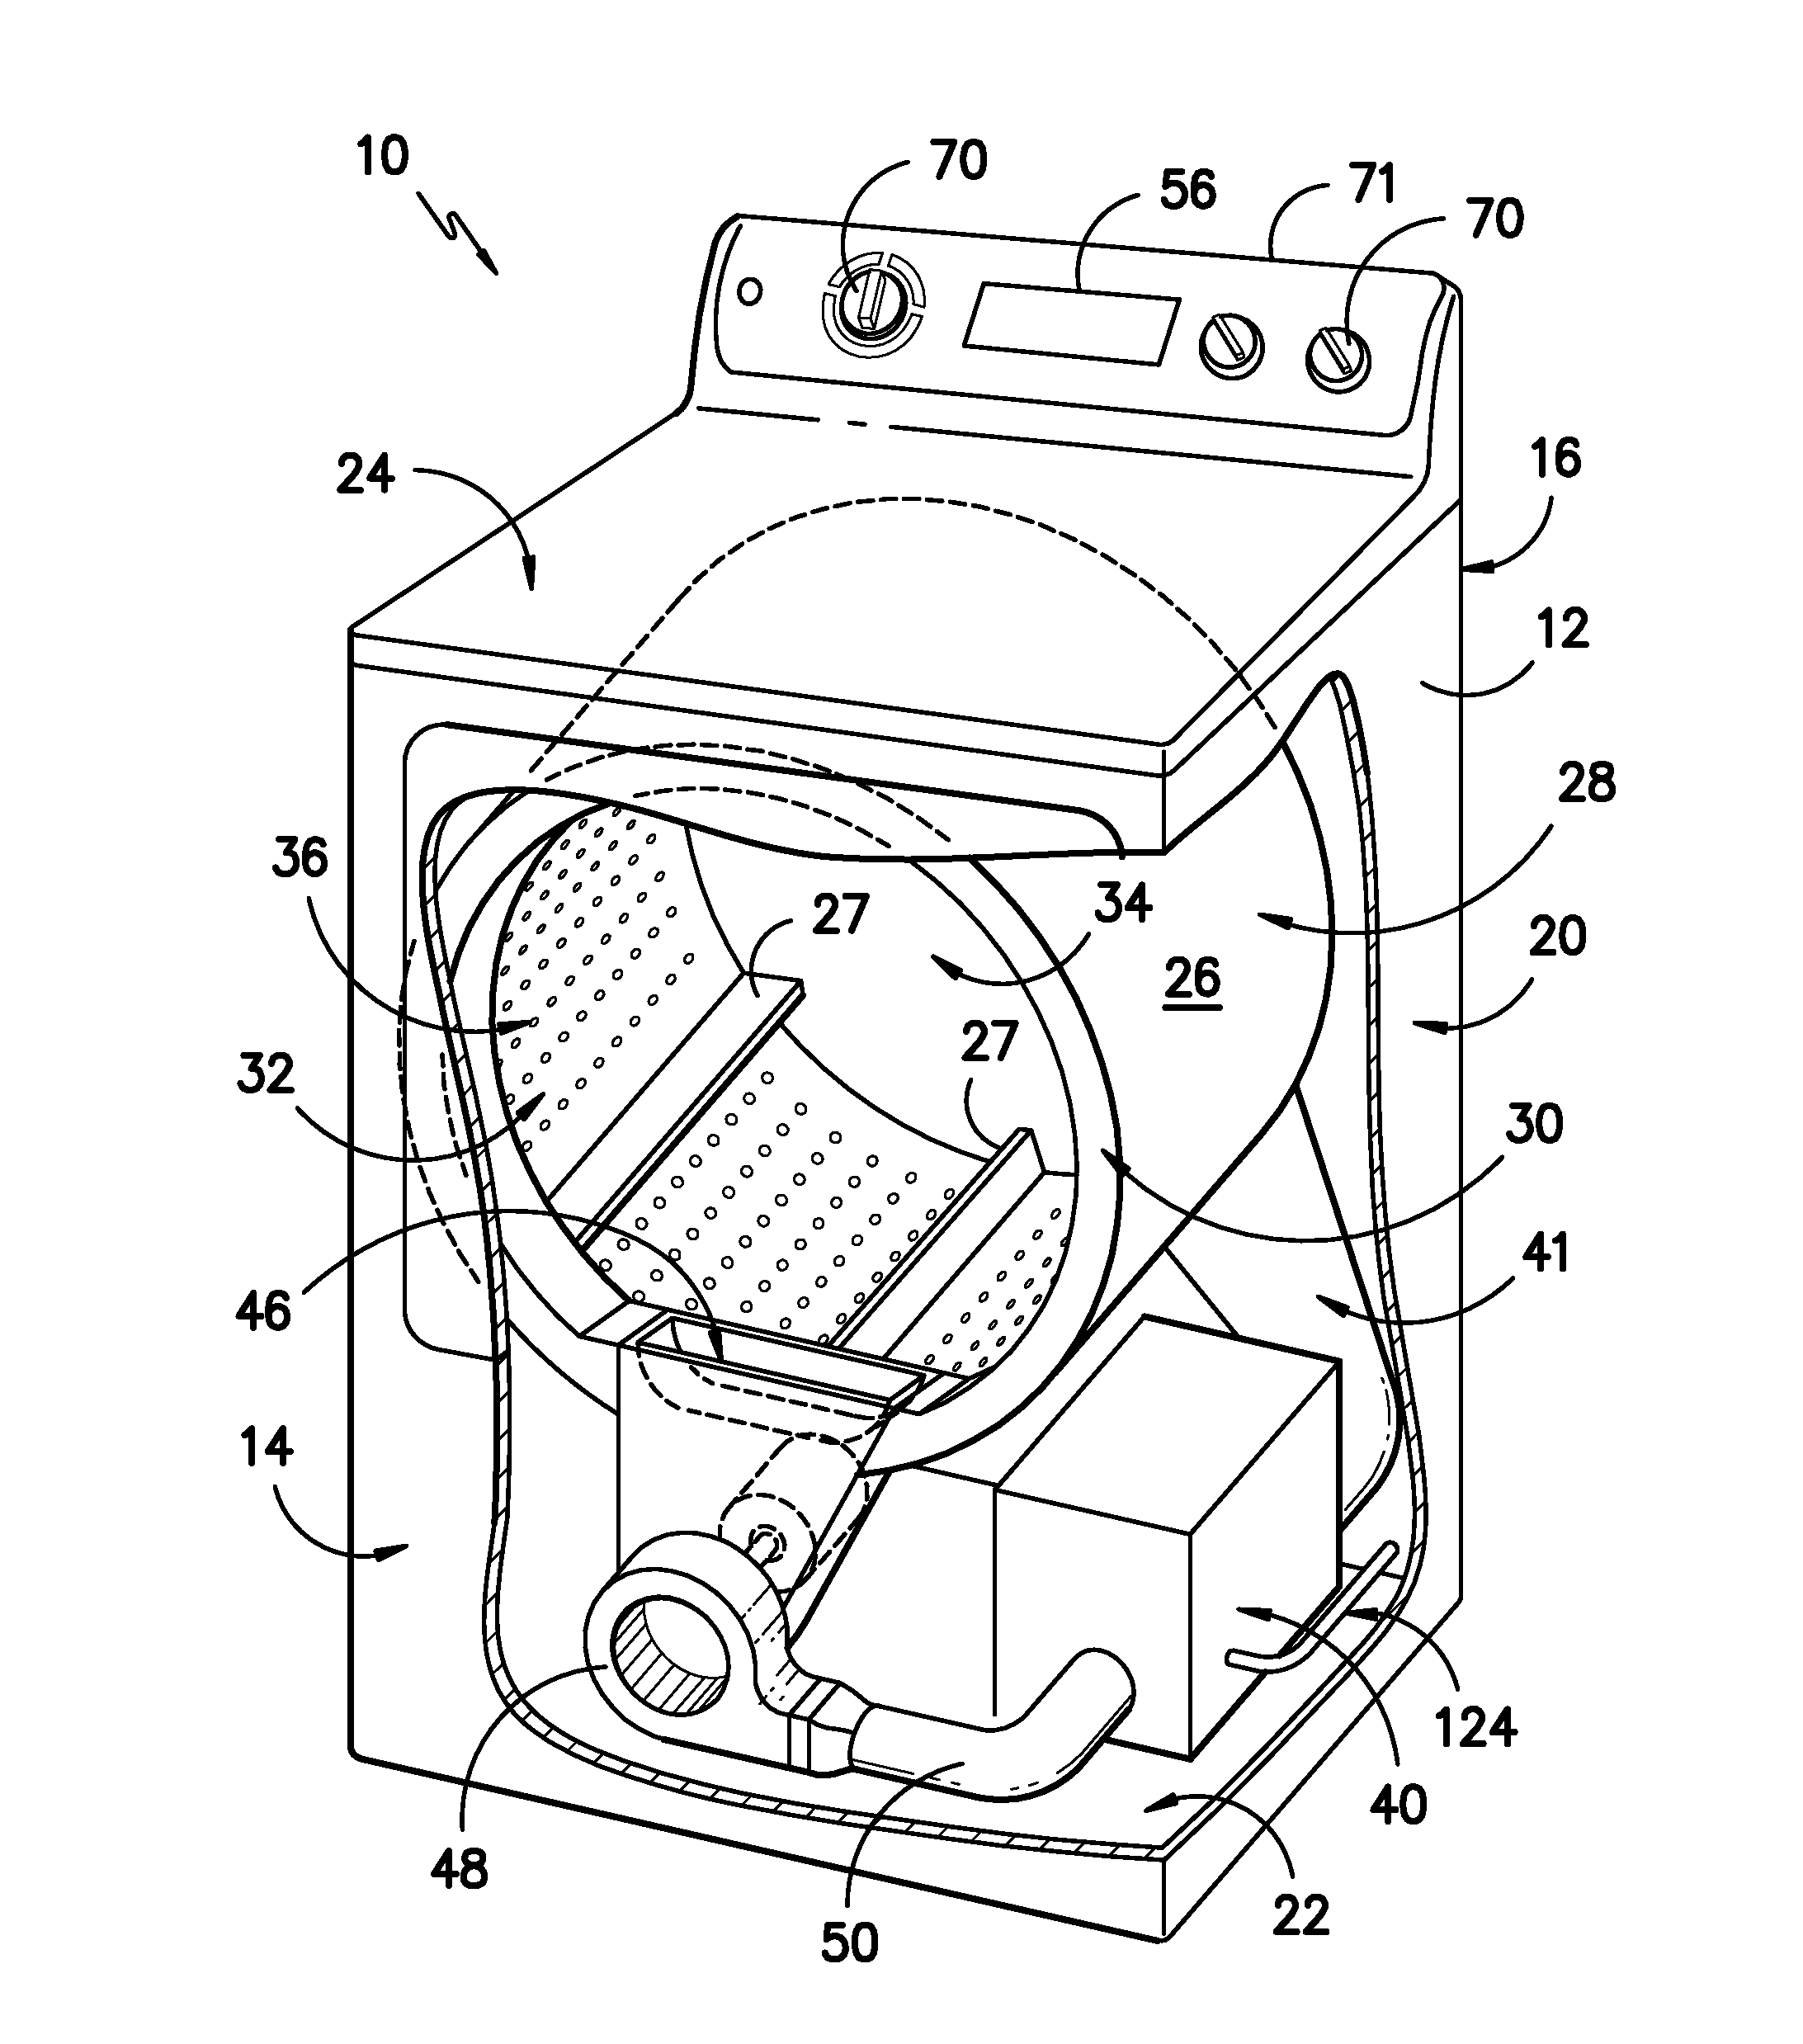 Dryer appliance with accelerated refrigerant cycle